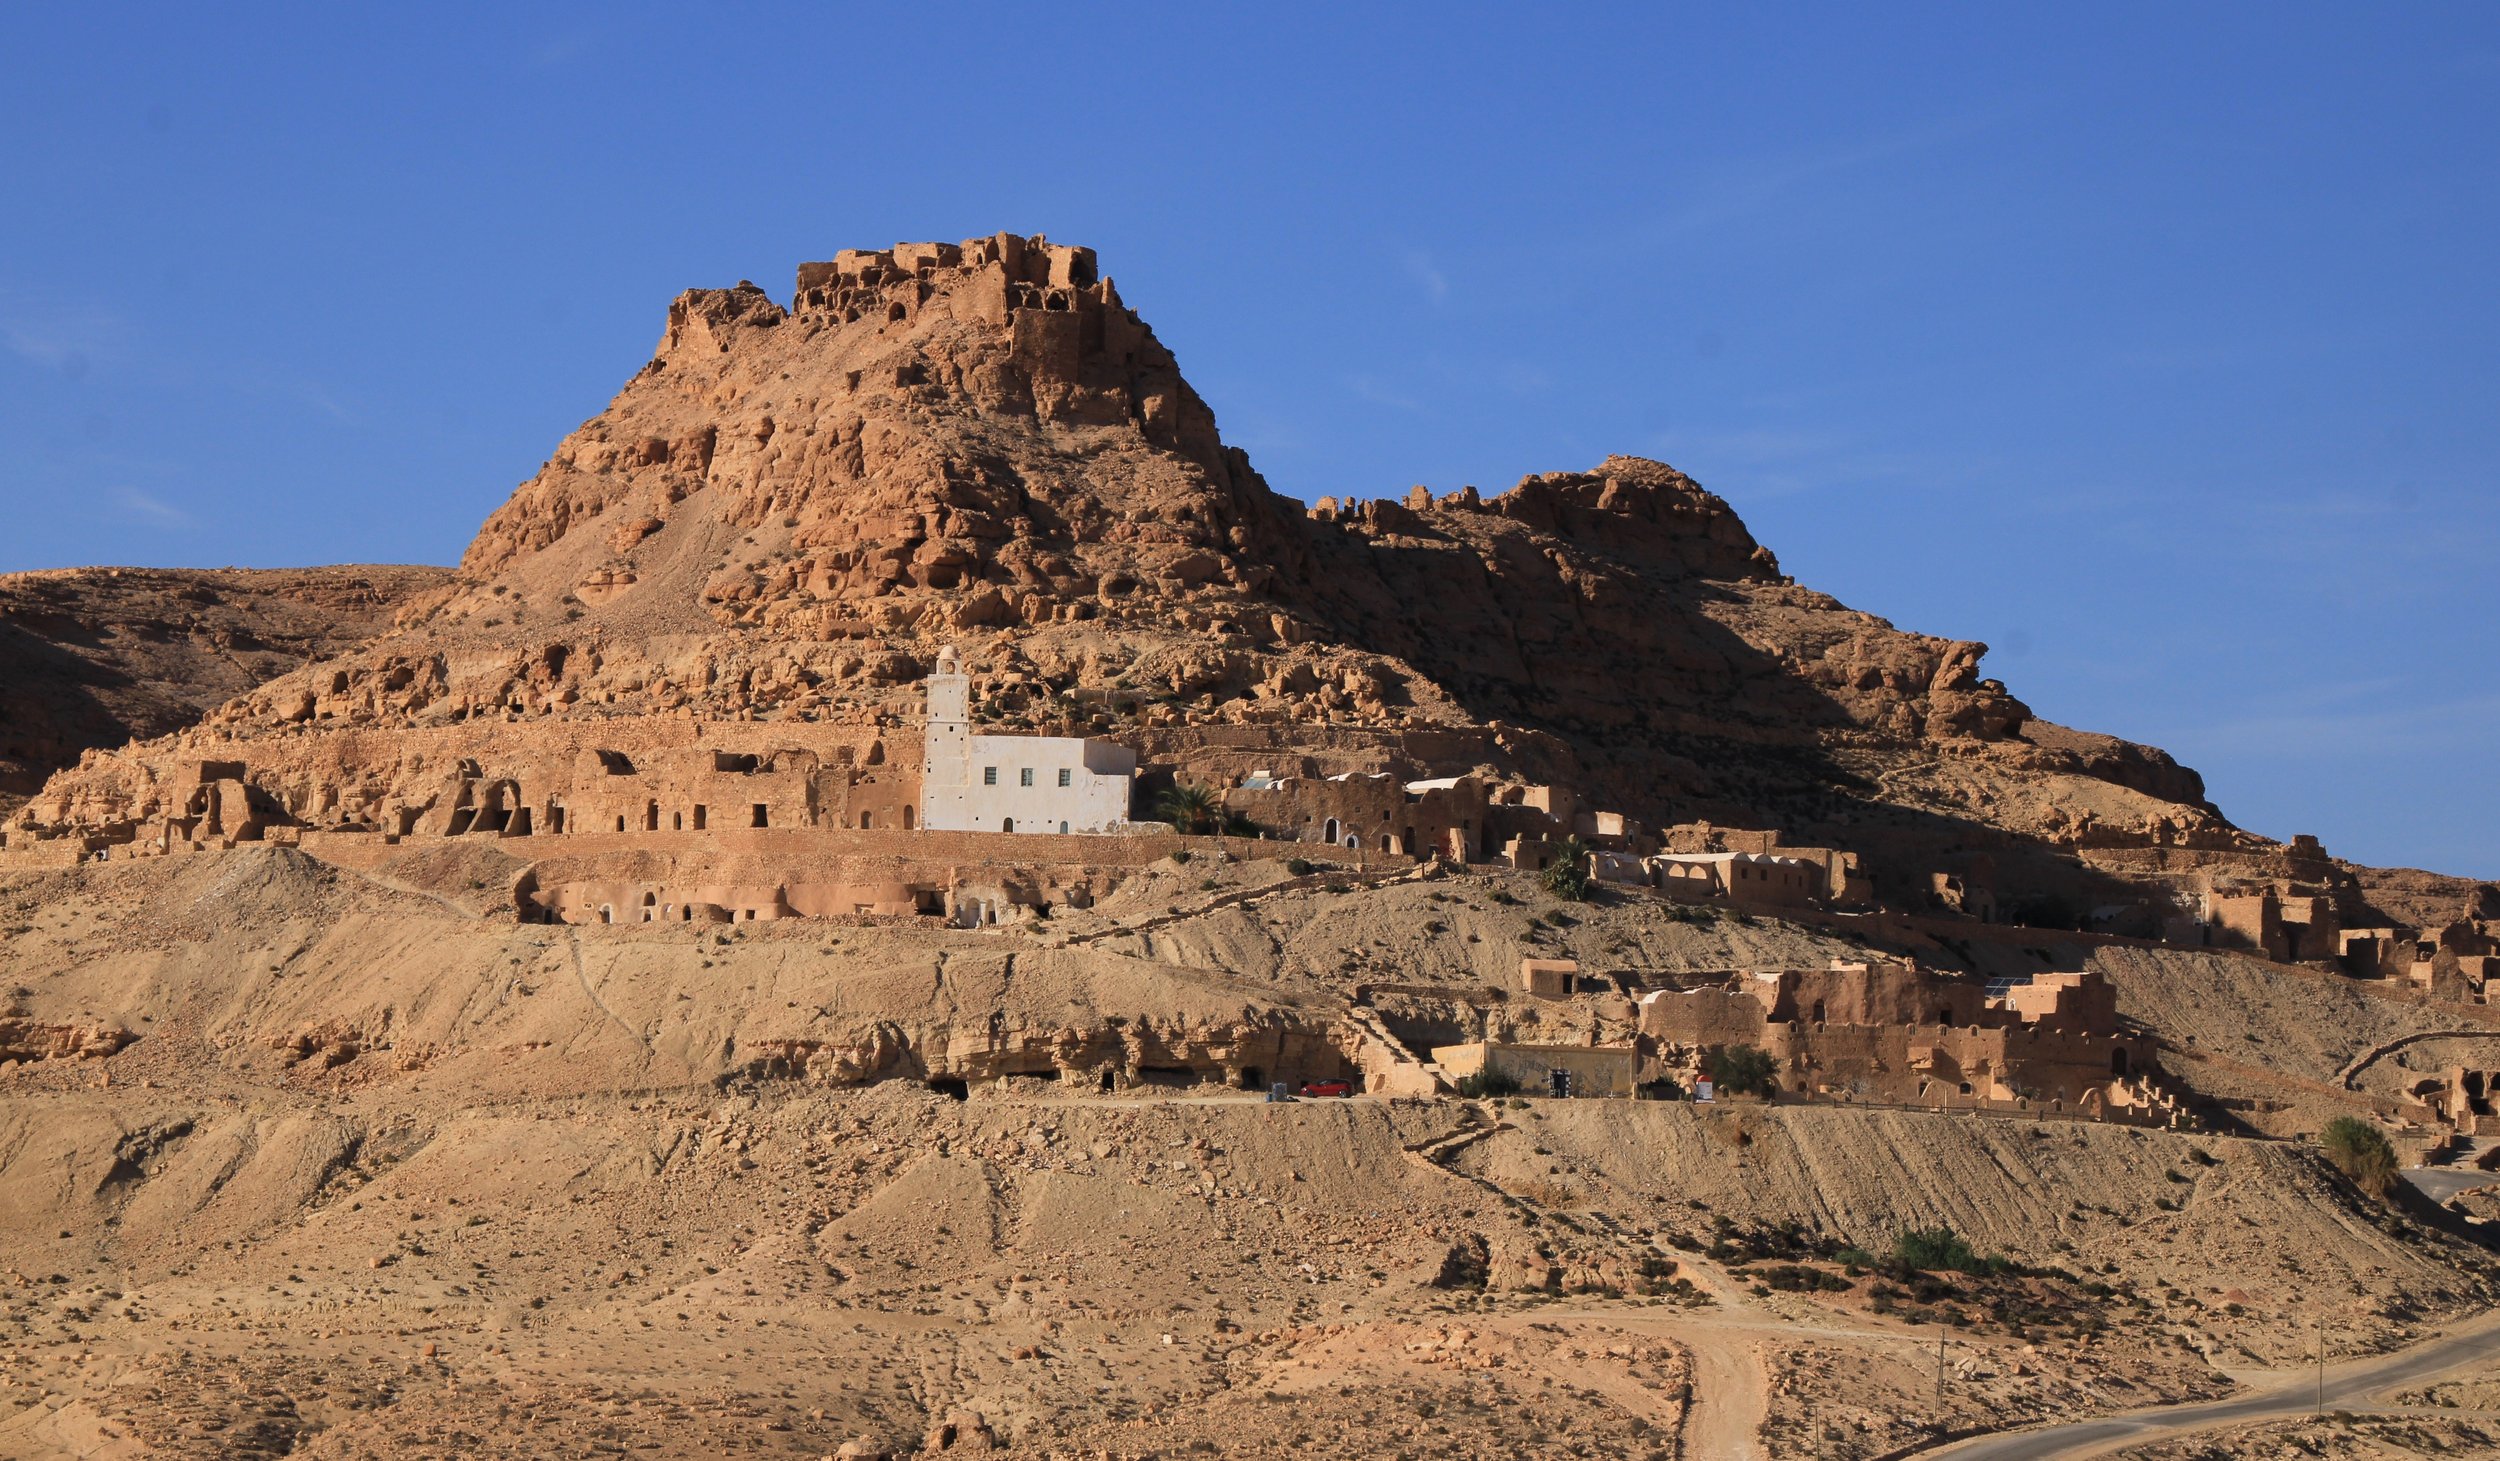  NOVEMBER 21st, 2022. PICTURED: Old Douiret, a Berber citadel. PC: Andrew Corbley © 